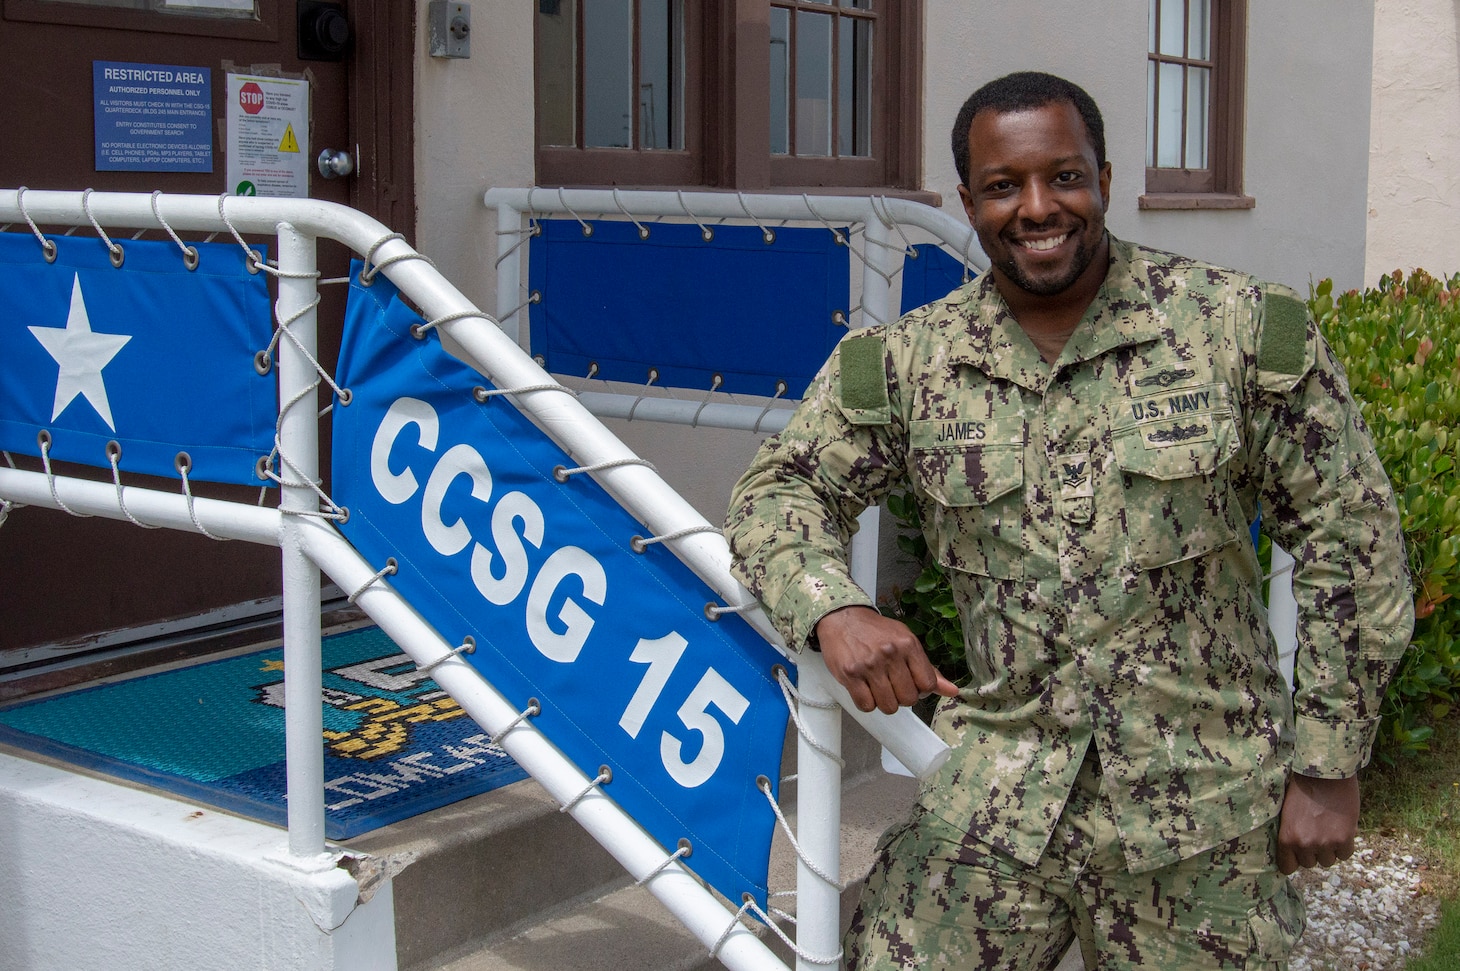 Intelligence Specialist 2nd Class Joshua James, from Savannah, Ga., stands in front of the entrance of Commander, Carrier Strike Group (CCSG) 15. CCSG-15 conducts integrated training to provide Fleet Commanders with deployable combat ready maritime forces in support of global operations. (U.S. Navy photo by Mass Communication Specialist 1st Class Christopher Cavagnaro/Released)